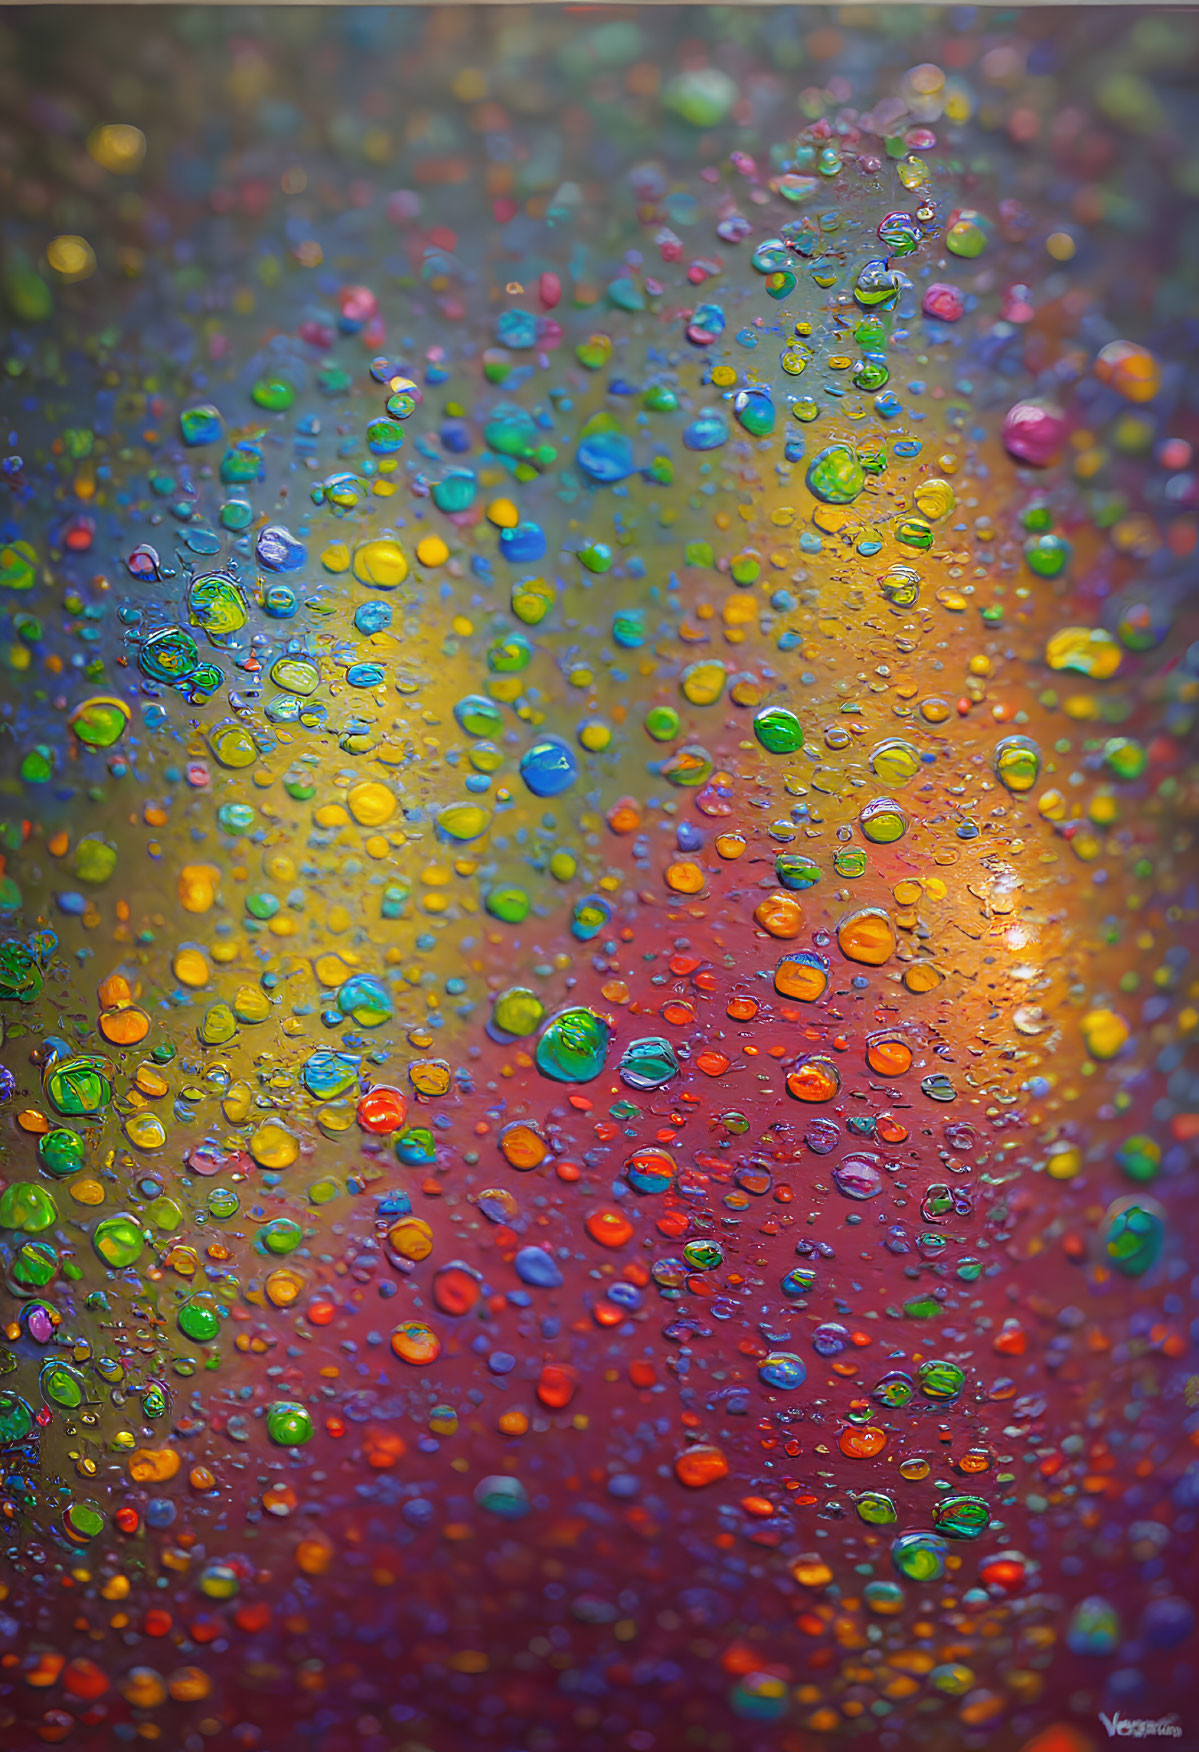 Multicolored Water Droplets on Reflective Surface